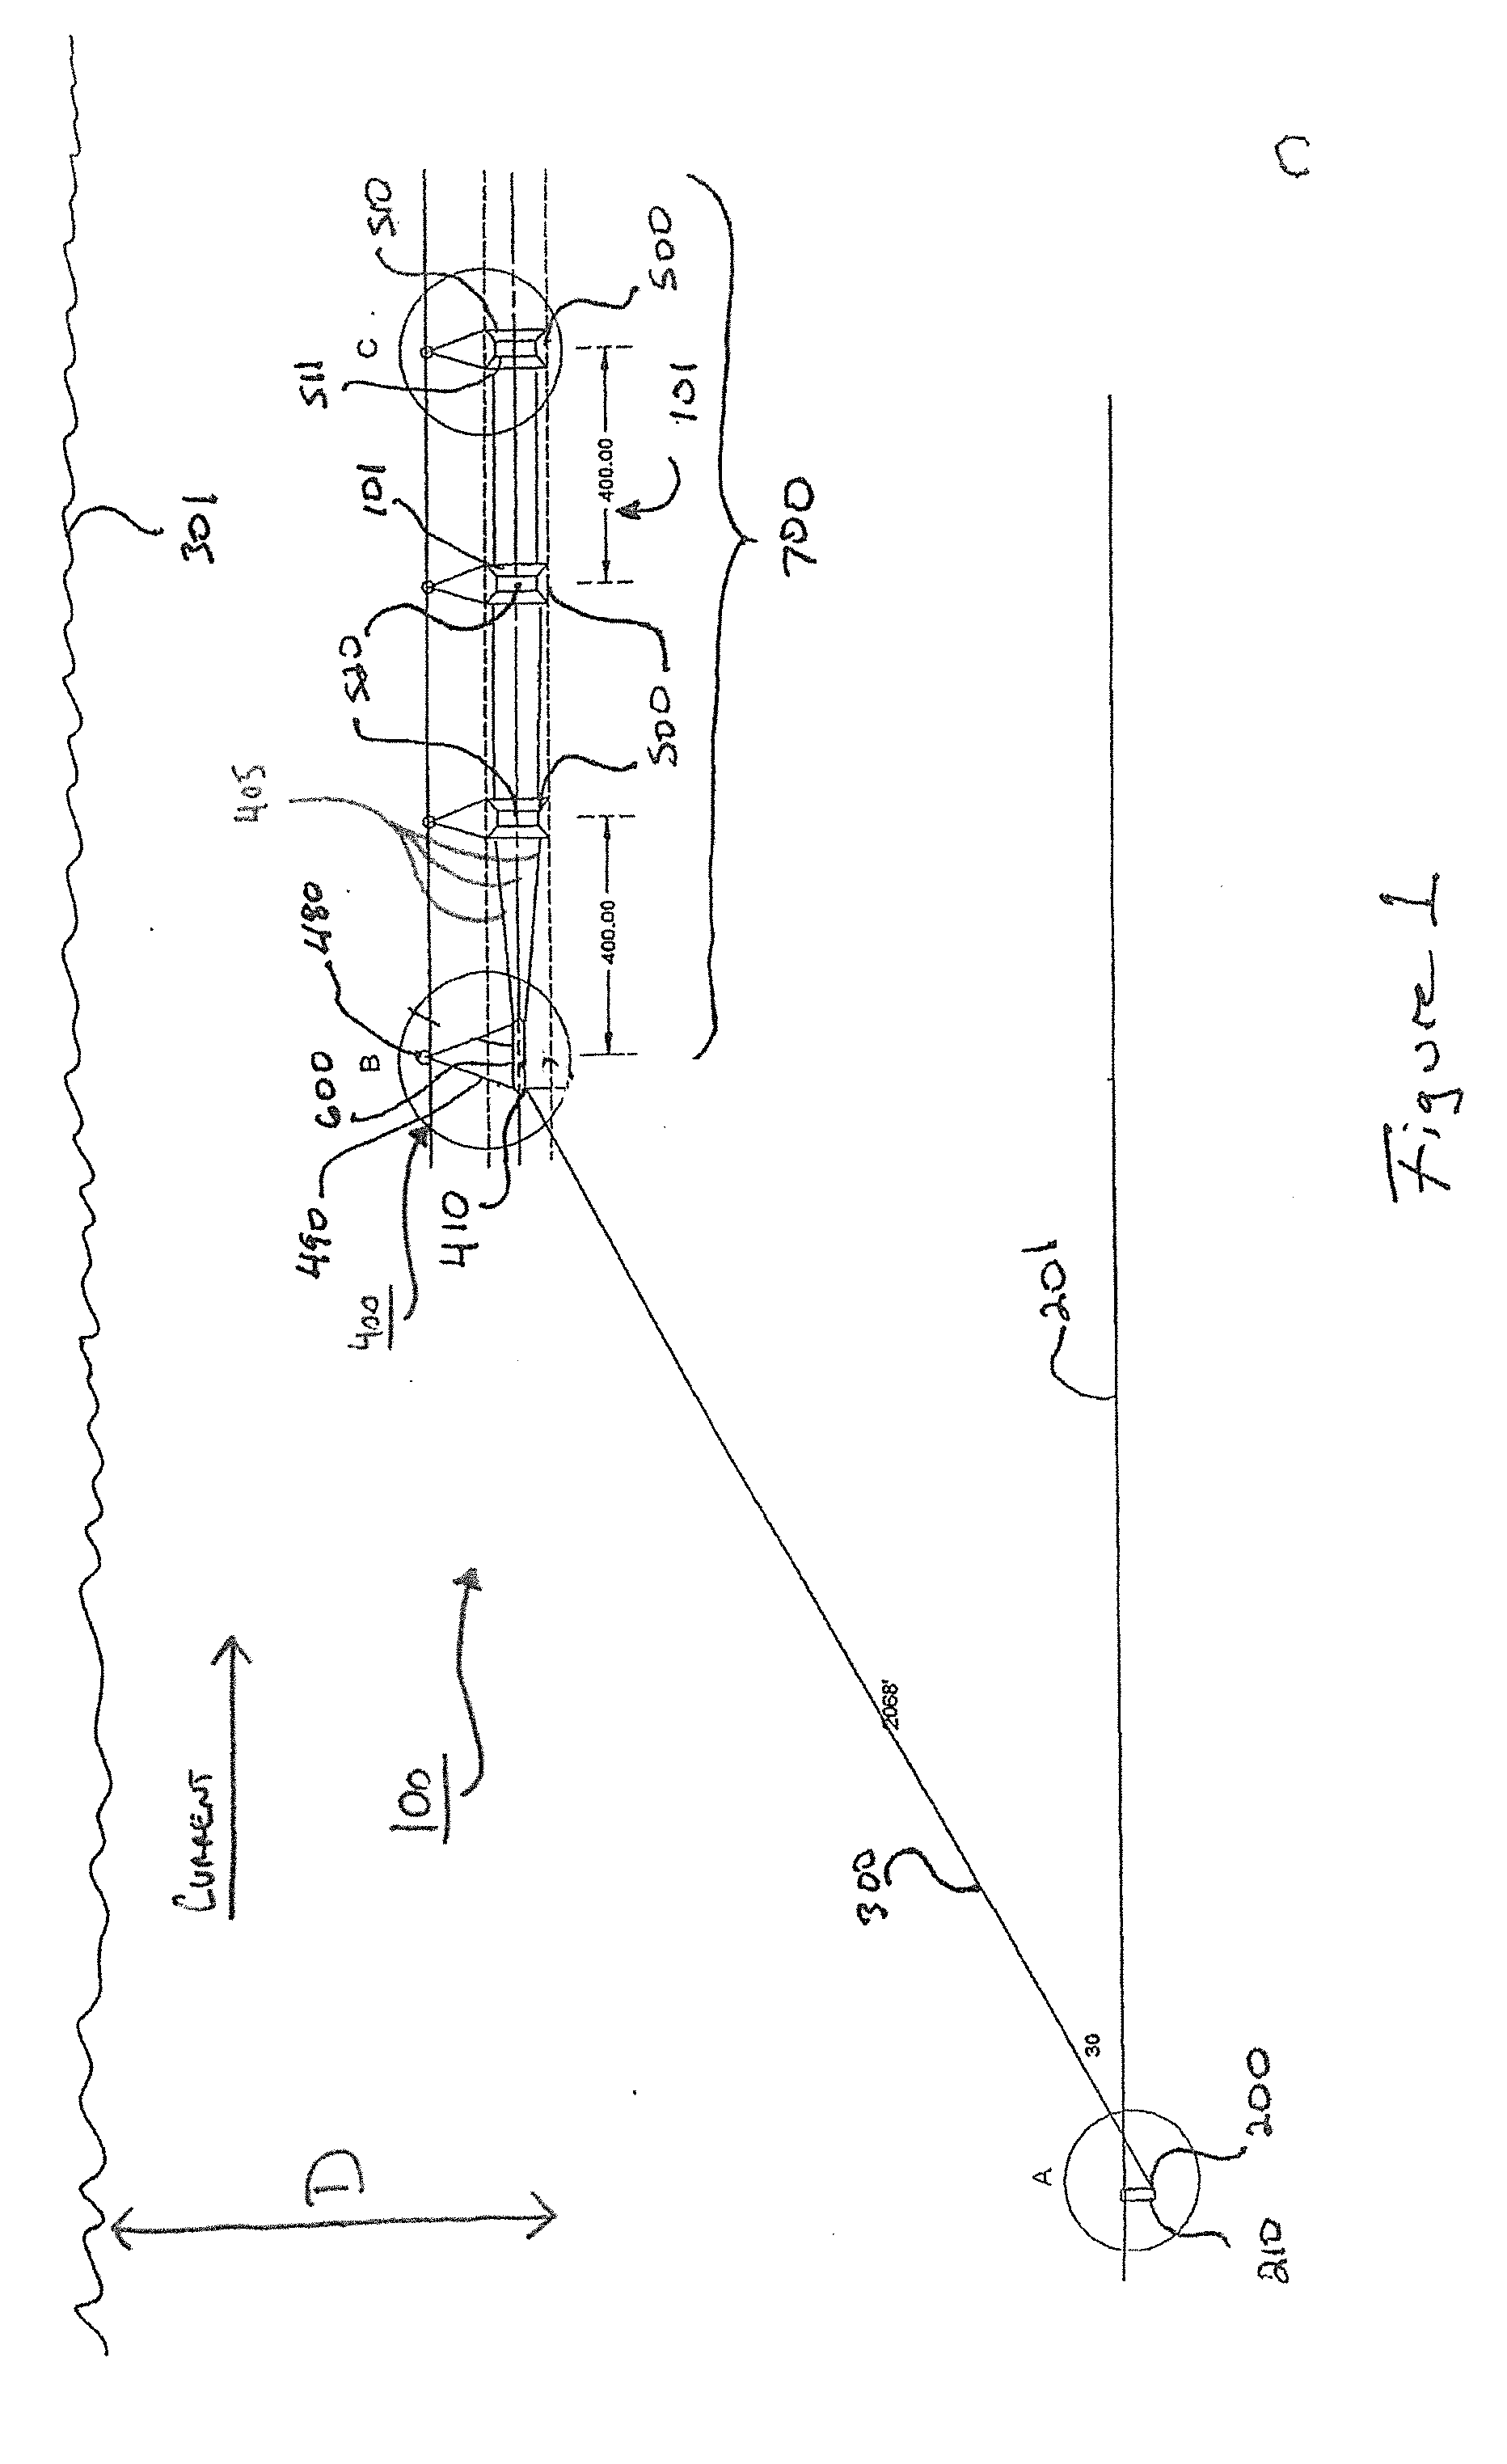 Offshore hydroelectric turbine assembly and method